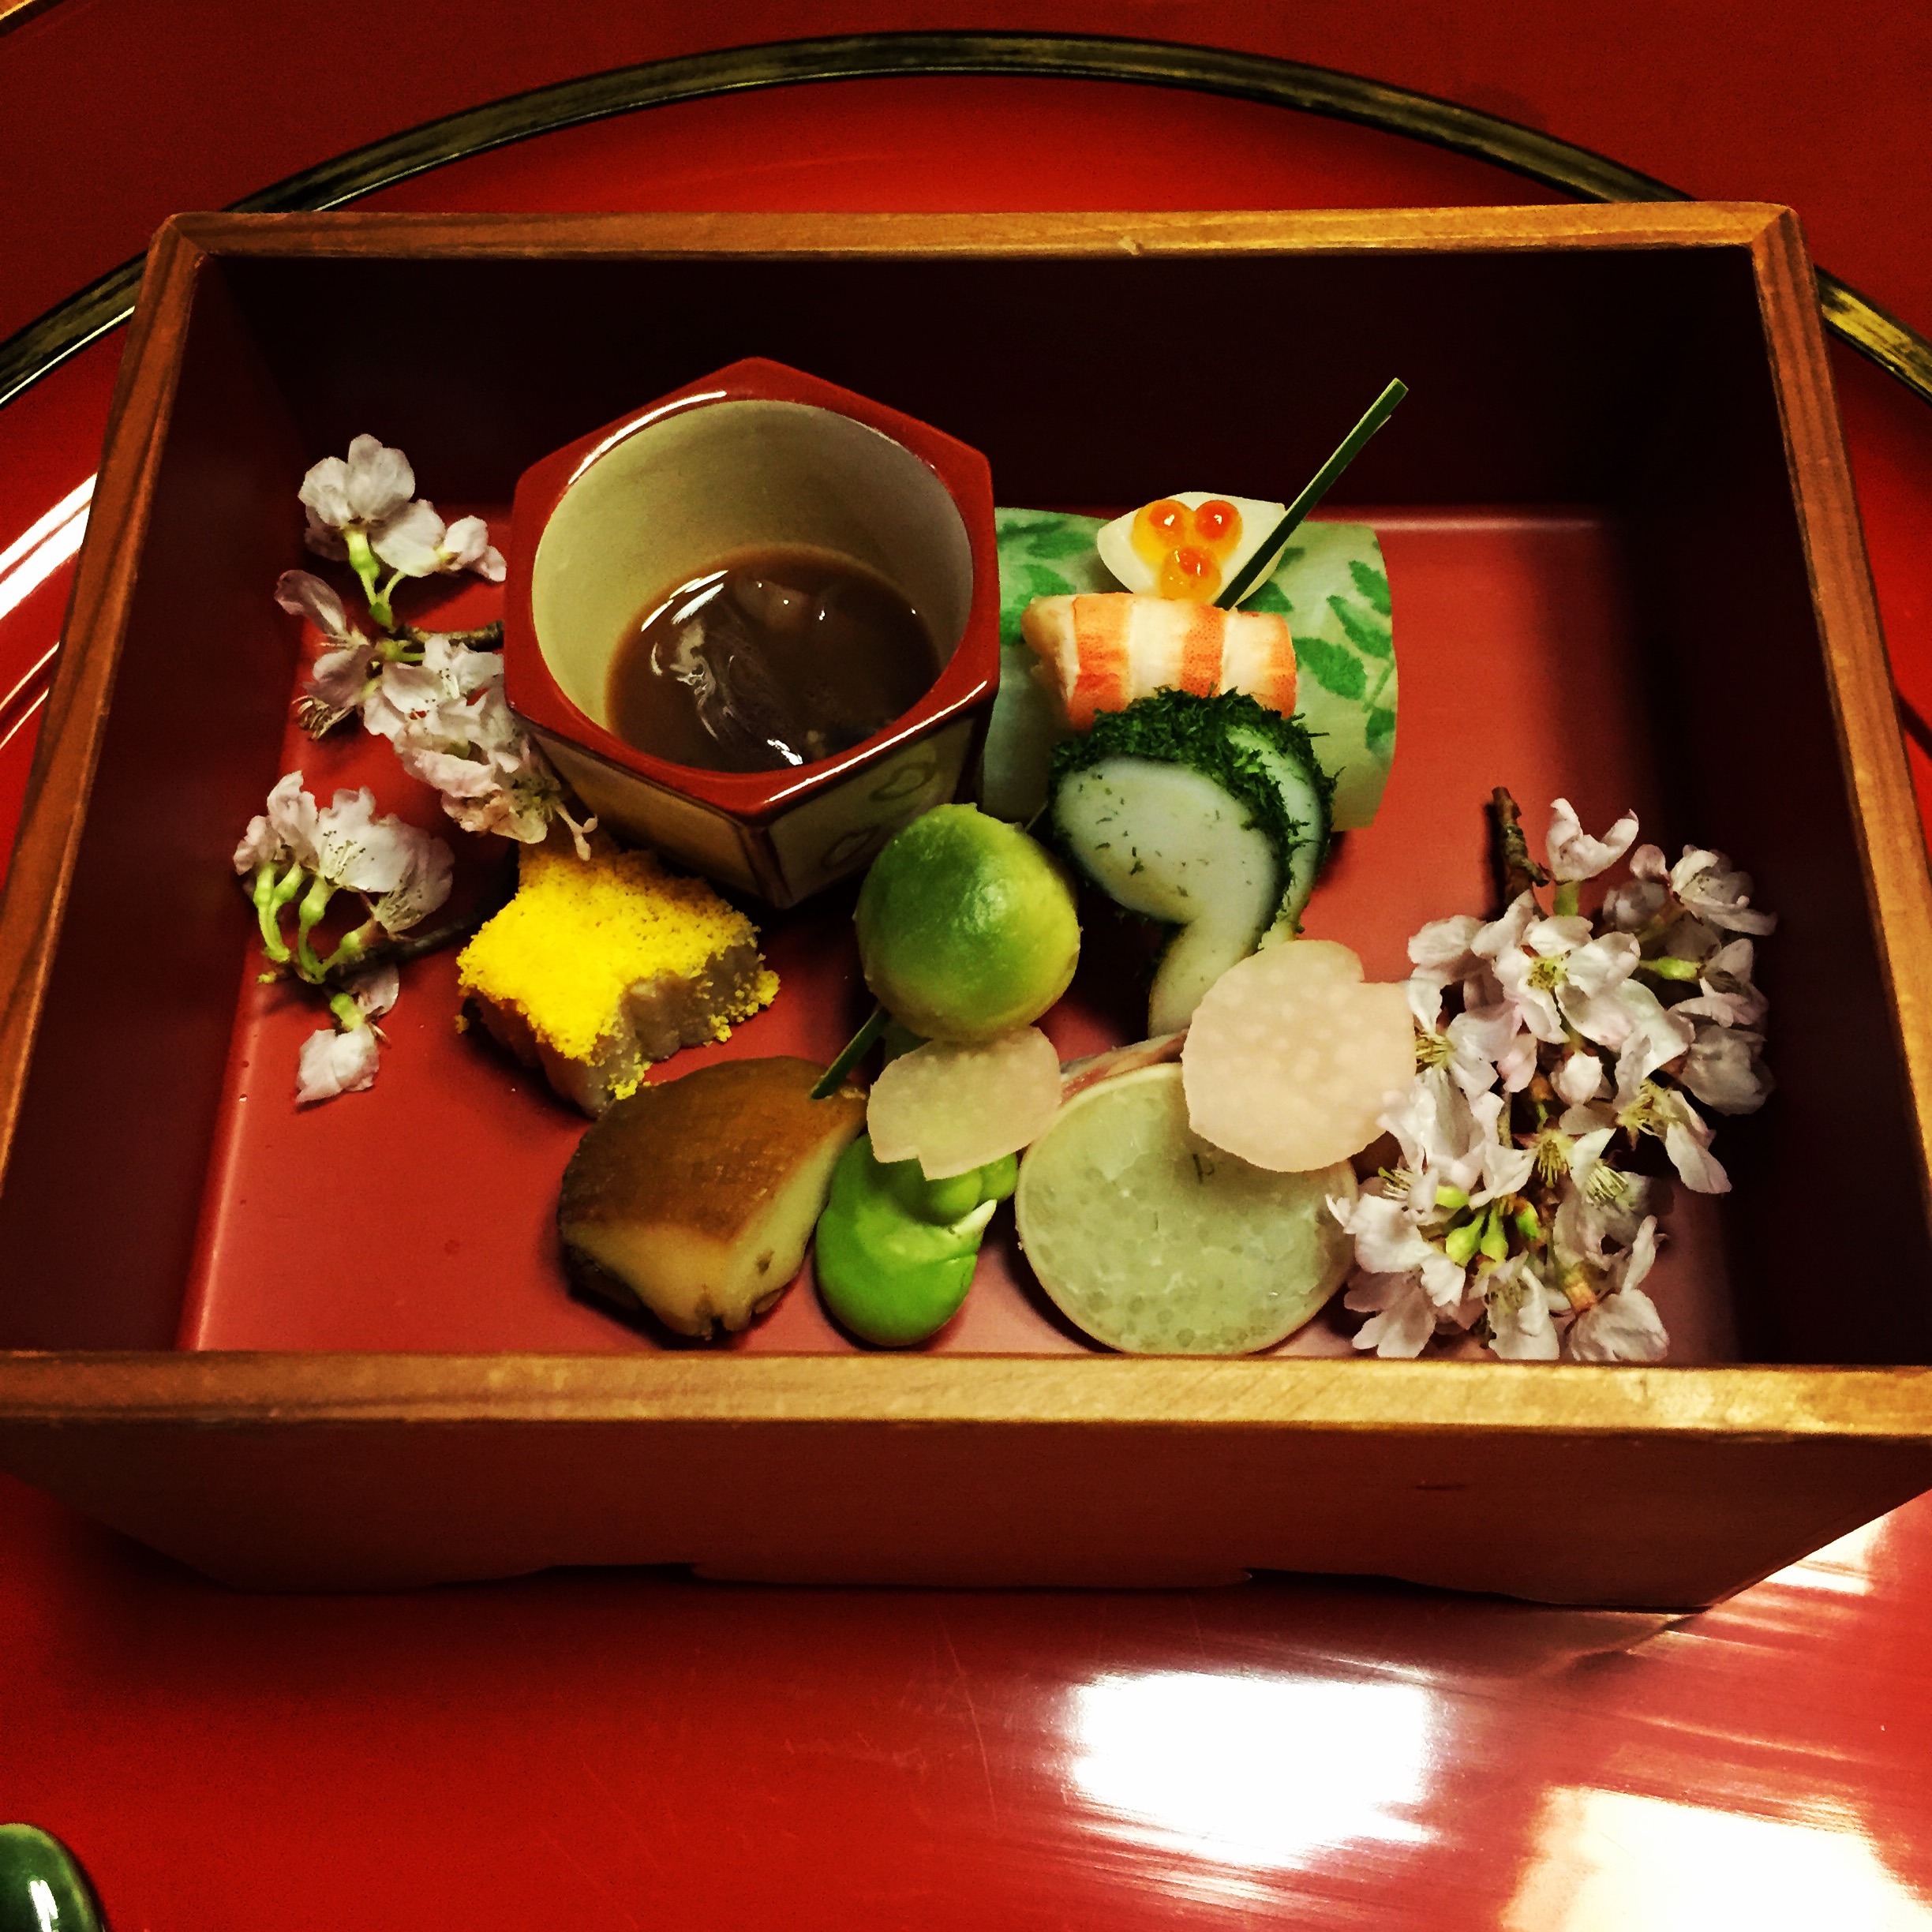 a tray of food on a red surface